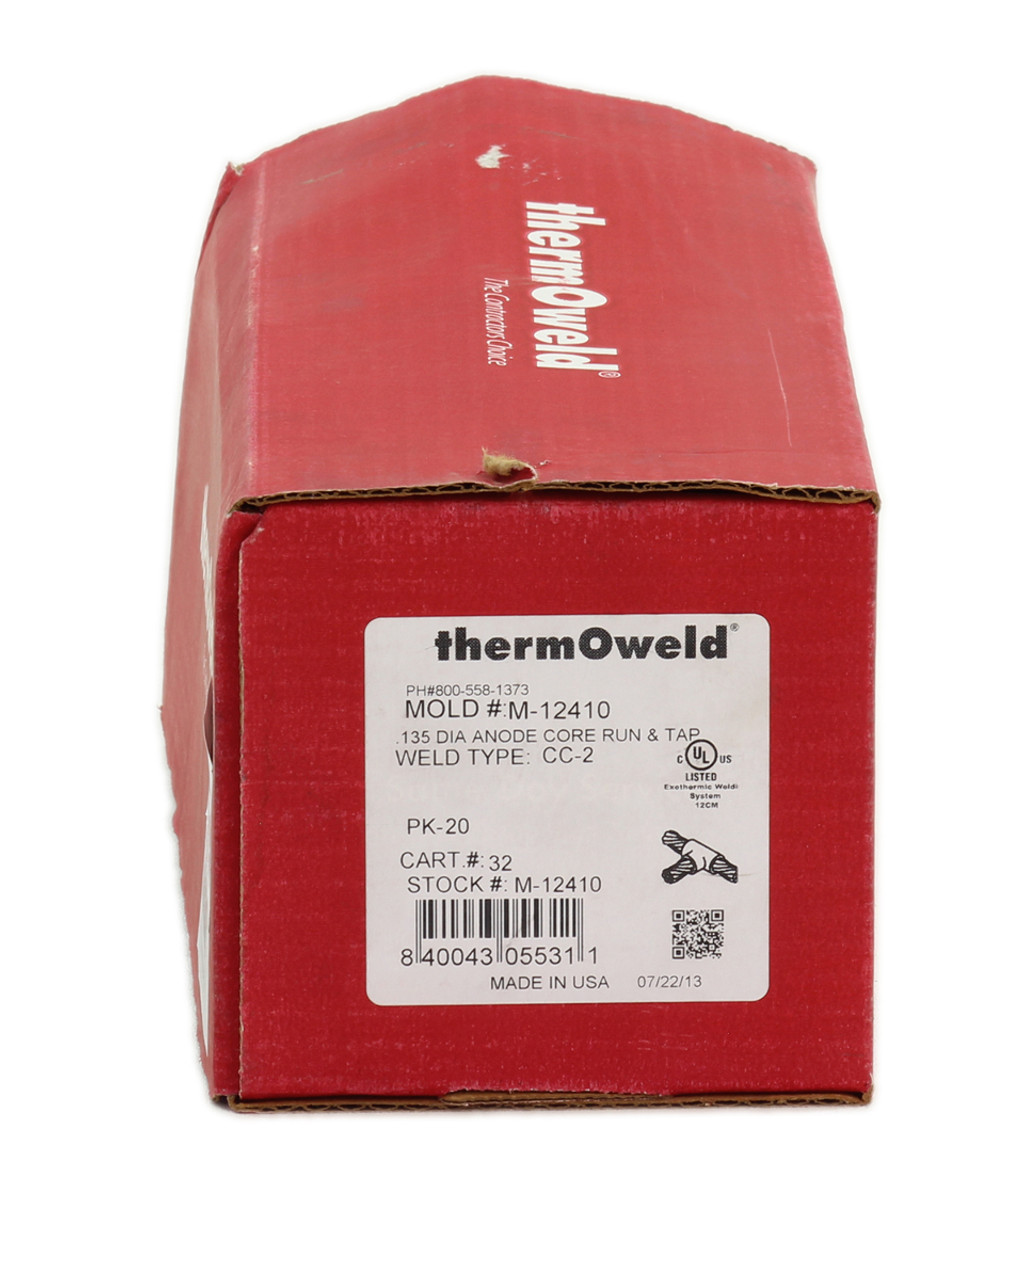 ThermOweld M-12410 Graphite Exothermic Mold Weld Weld Type: CC-2 .135 Anode Core Run and Tap Cart. 32